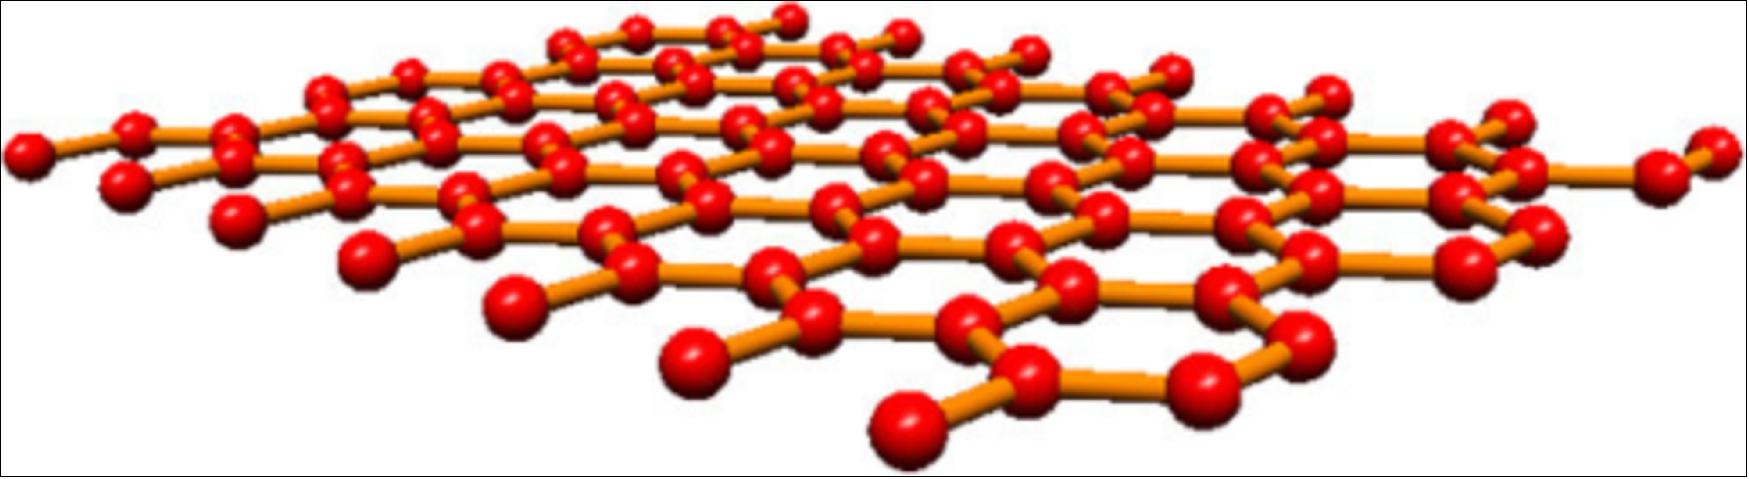 Figure 11: Atom-thick graphene layer. Graphene is made out of a single layer of graphite, a hexagonal lattice of carbon atoms, so thin that it is transparent, and essentially two-dimensional (image credit: Wikimedia Commons/Mohammad Javad Kiani, Fauzan Khairi Che Harun, Mohammad Taghi Ahmadi, Meisam Rahmani, Mahdi Saeidmanesh, Moslem Zare)